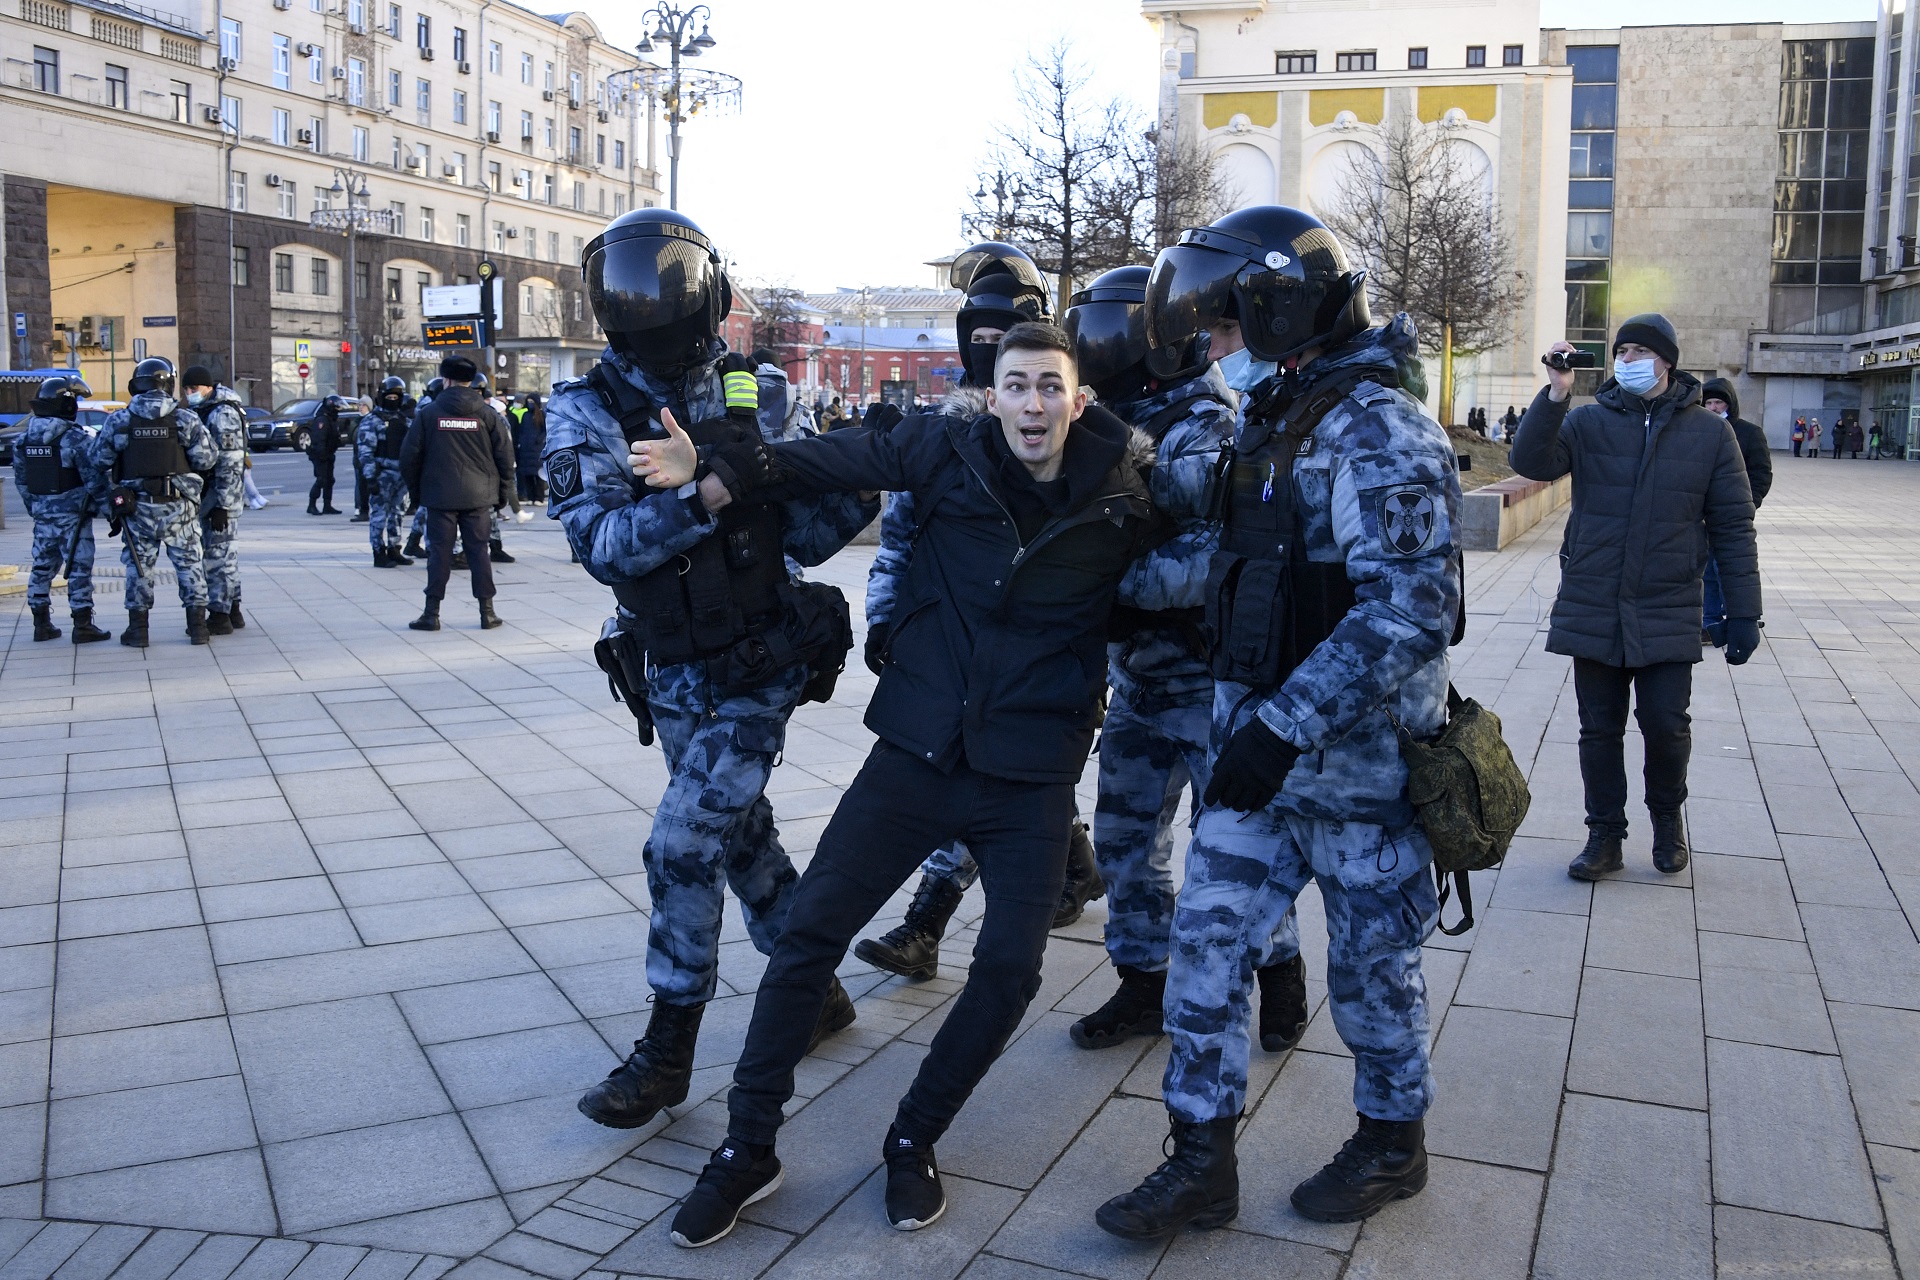 Police detain a man during a protest against the Russian invasion of Ukraine in central Moscow (Alexander NEMENOV / AFP)